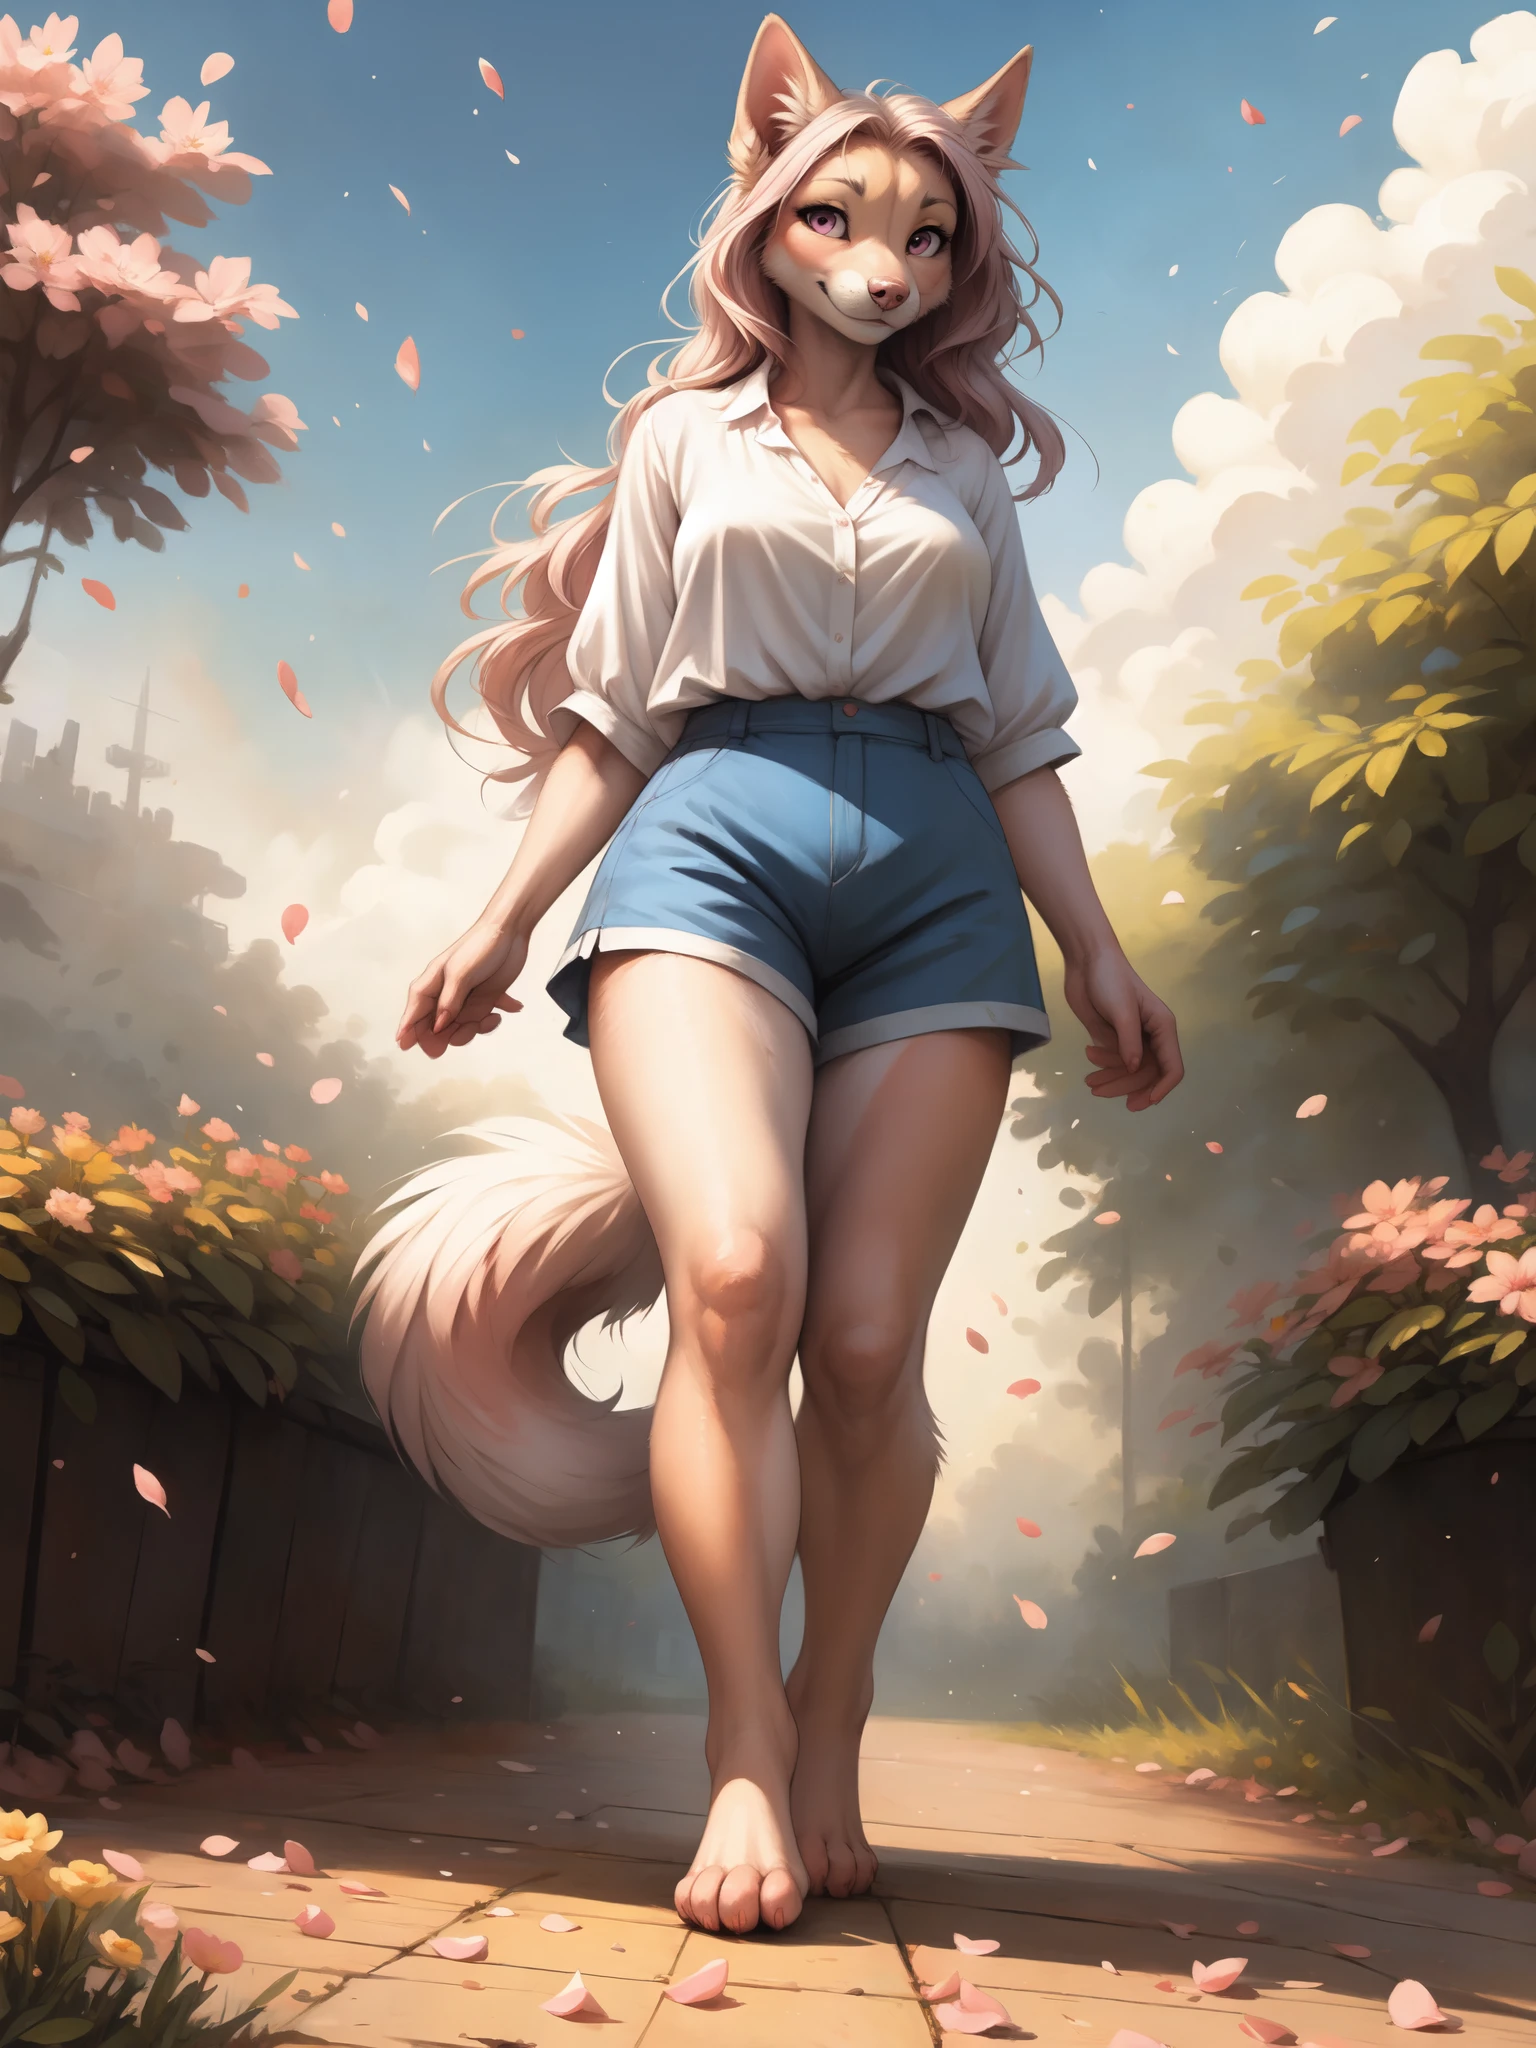 by kenket, by totesfleisch8, (by thebigslick, by silverfox5213:0.8), (by syuro:0.2), Athena, a cute pink domestic dog, tall, pink dog tail, pink pointy dog ears, pink eyes, white sclera, long pink wavy hair, cute snout, pink nose, wearing white blouse, blue shorts, barefoot, outdoors in a beautiful public park, windy day, flower petals flying everywhere 